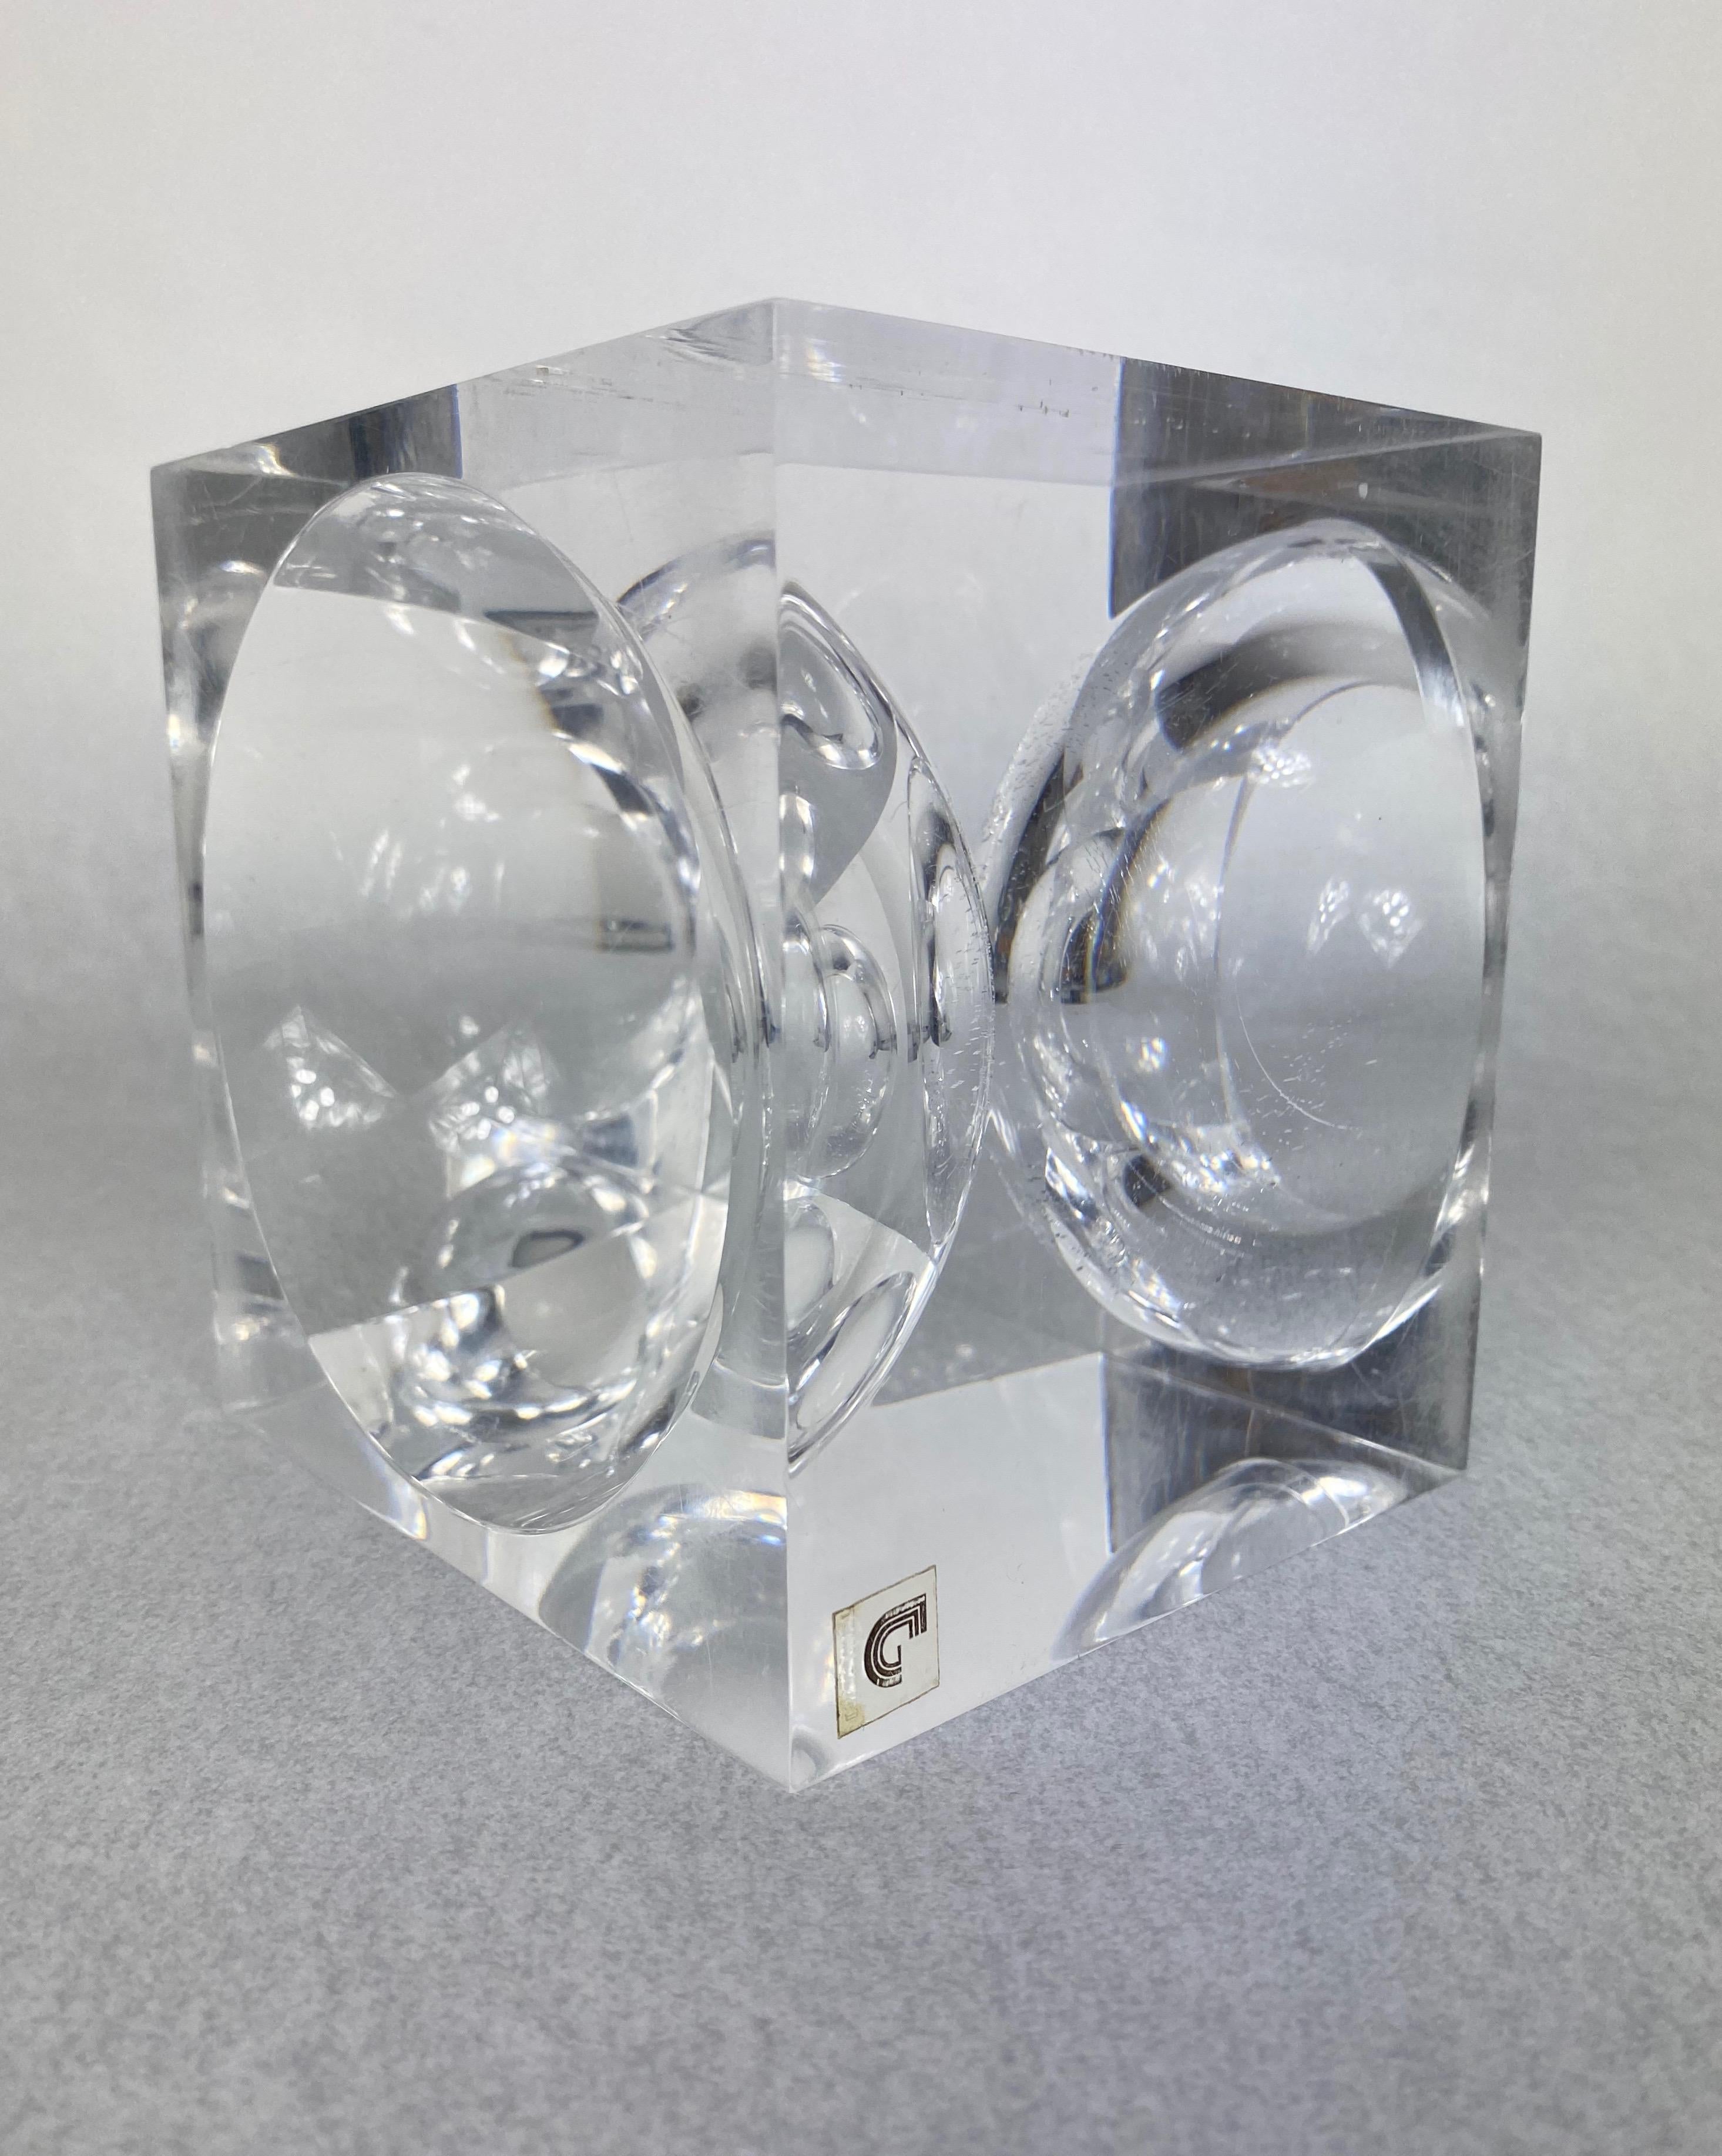 Lucite Acrylic Cubic Sculpture by Team Guzzini, Italy, 1970s Spiral Geometry 2